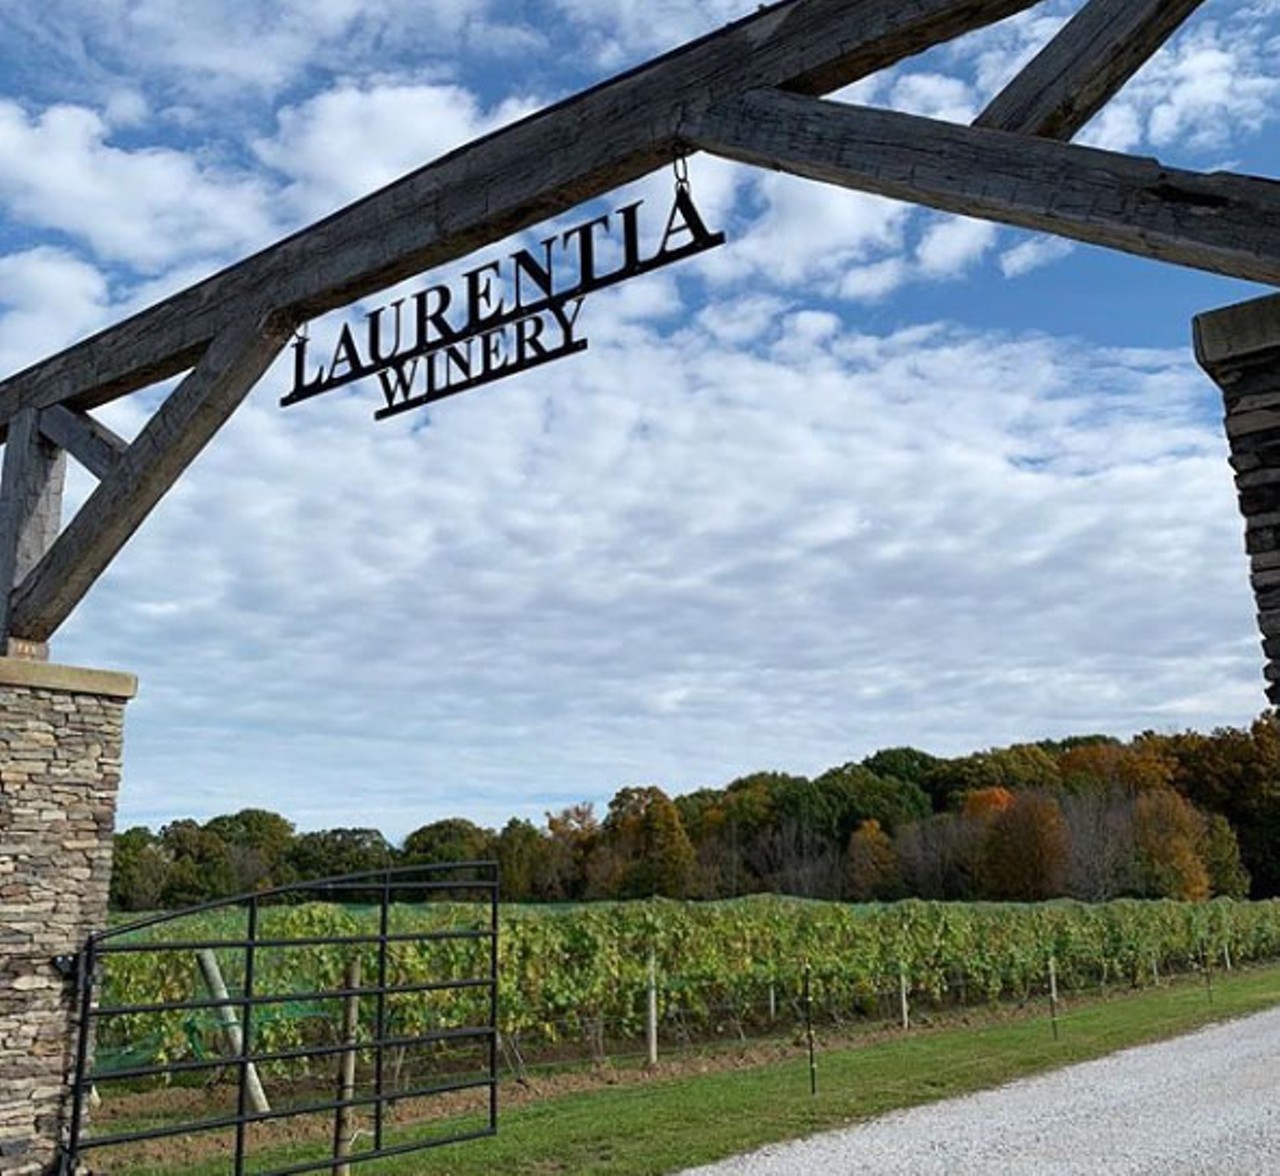 Laurentia Vineyard & Winery
4599 S. Madison Rd, Madison, 440-296-9175
Created by two brothers in 2011, this winery is homey and inviting, serving a variety of delectable wines and bites, as well as a Sunday brunch. 
Photo via laurentiawinery/Instagram